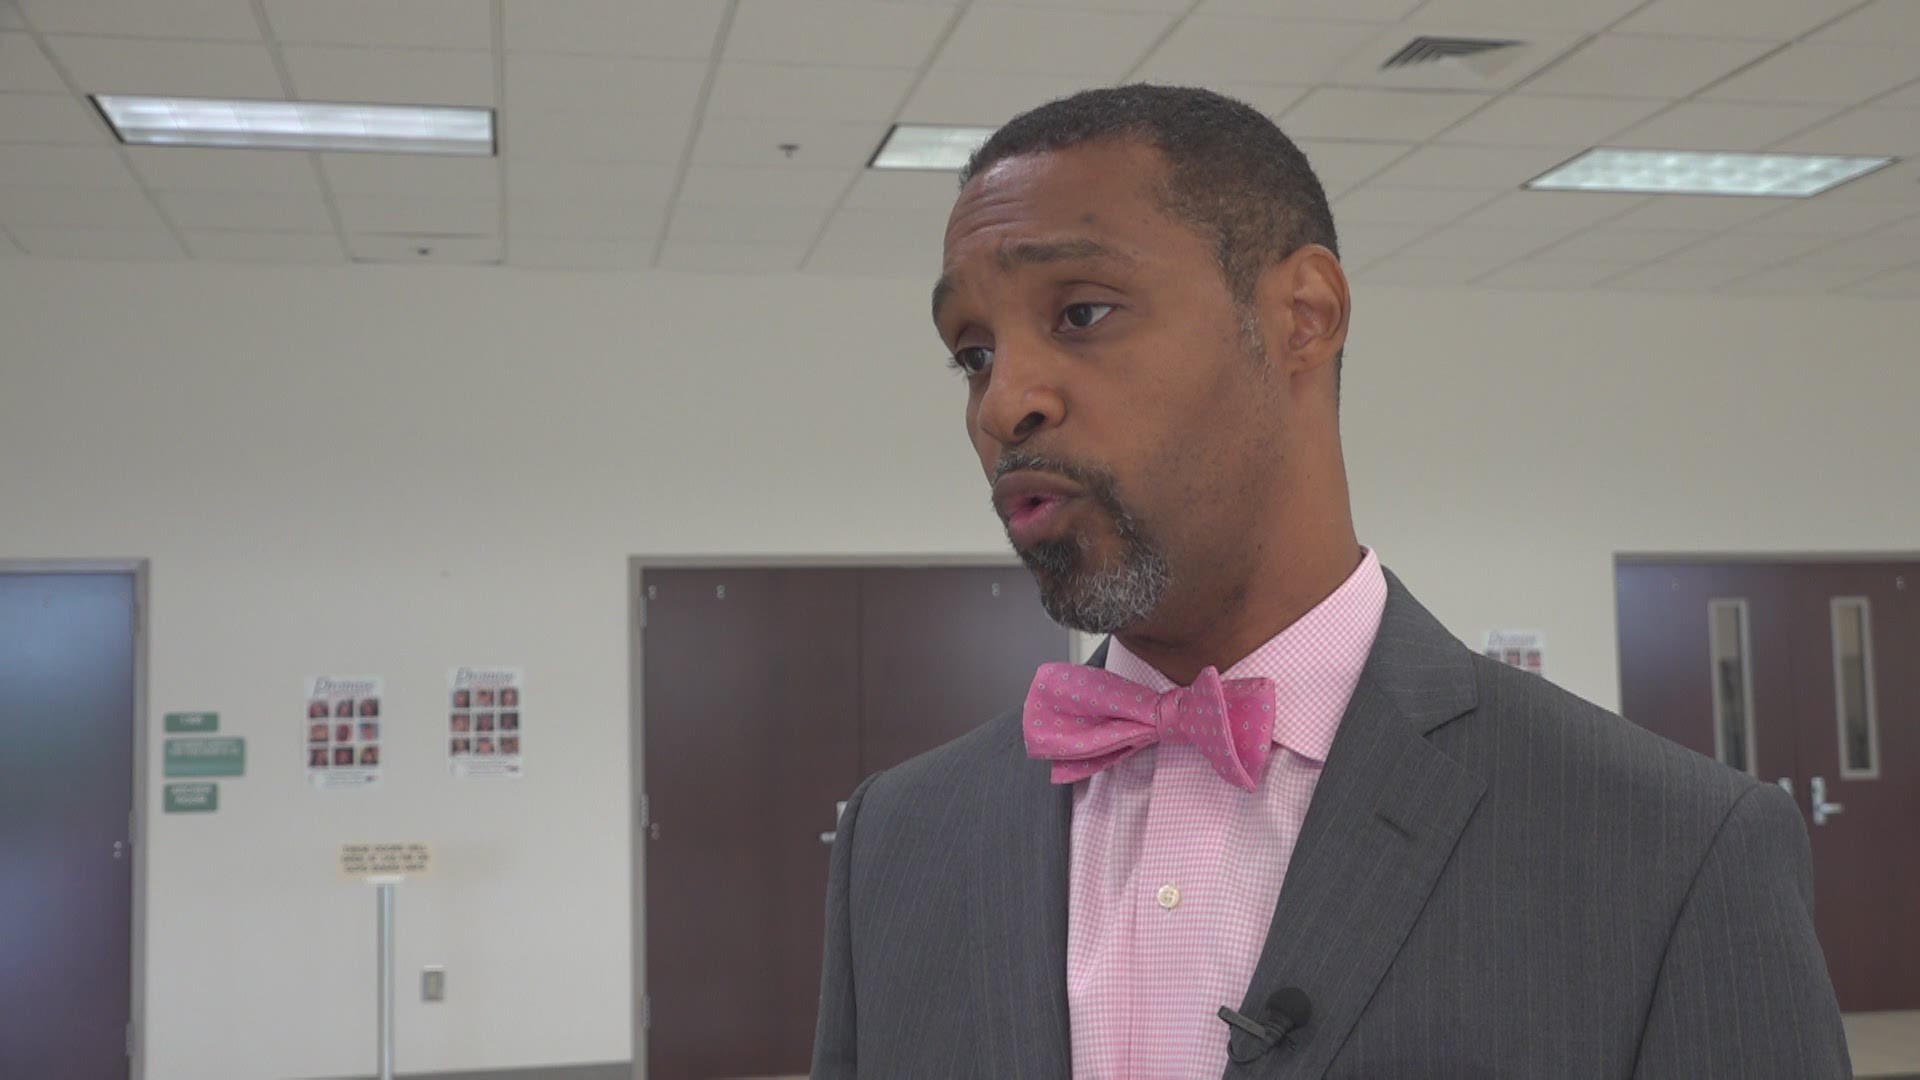 Bernard Watson, Director of Community Relations for Gwinnett County Schools, talked to 11 Alive after a letter to parents claimed a student discharged an airsoft gun at Creekland Middle School on Friday.